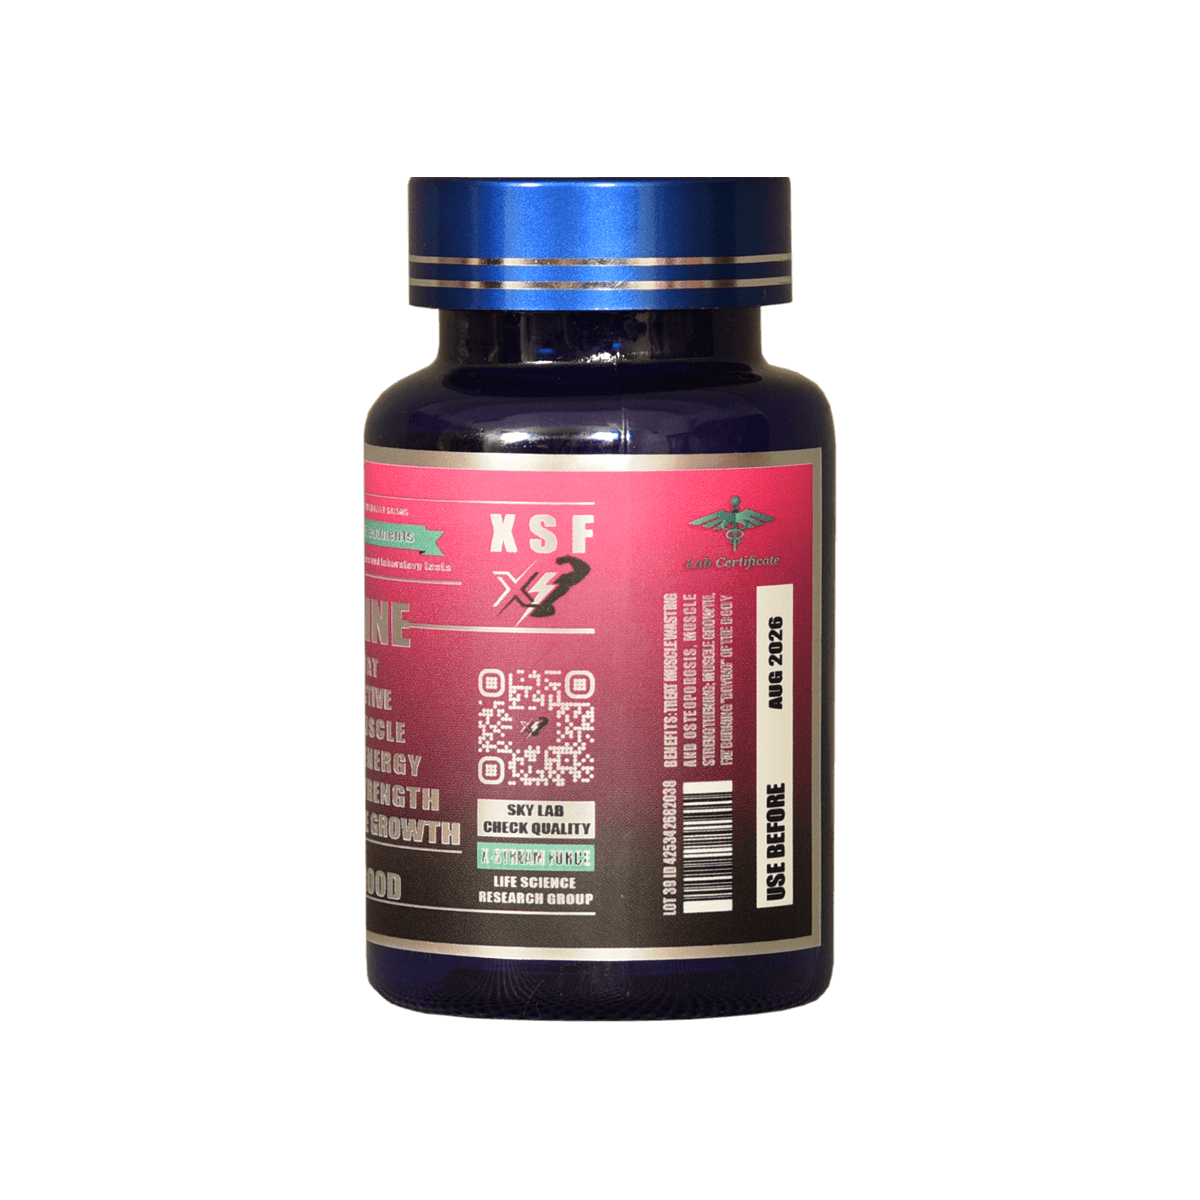 ostarine-mk2866-capsules-90-10mg-muscle shop-xstreamforce-for ladies-mass-strength-volume-hard and dry✦mk2866 sarms✦ fitness supplements | XSF Store